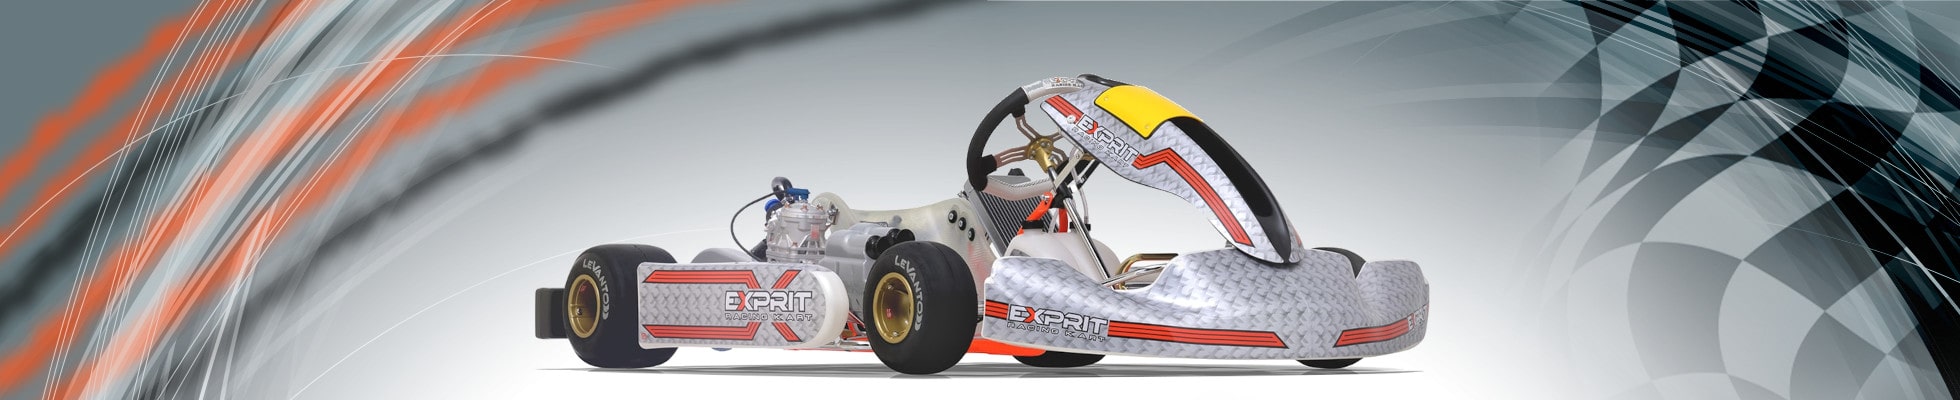 CHASSIS EXPRIT